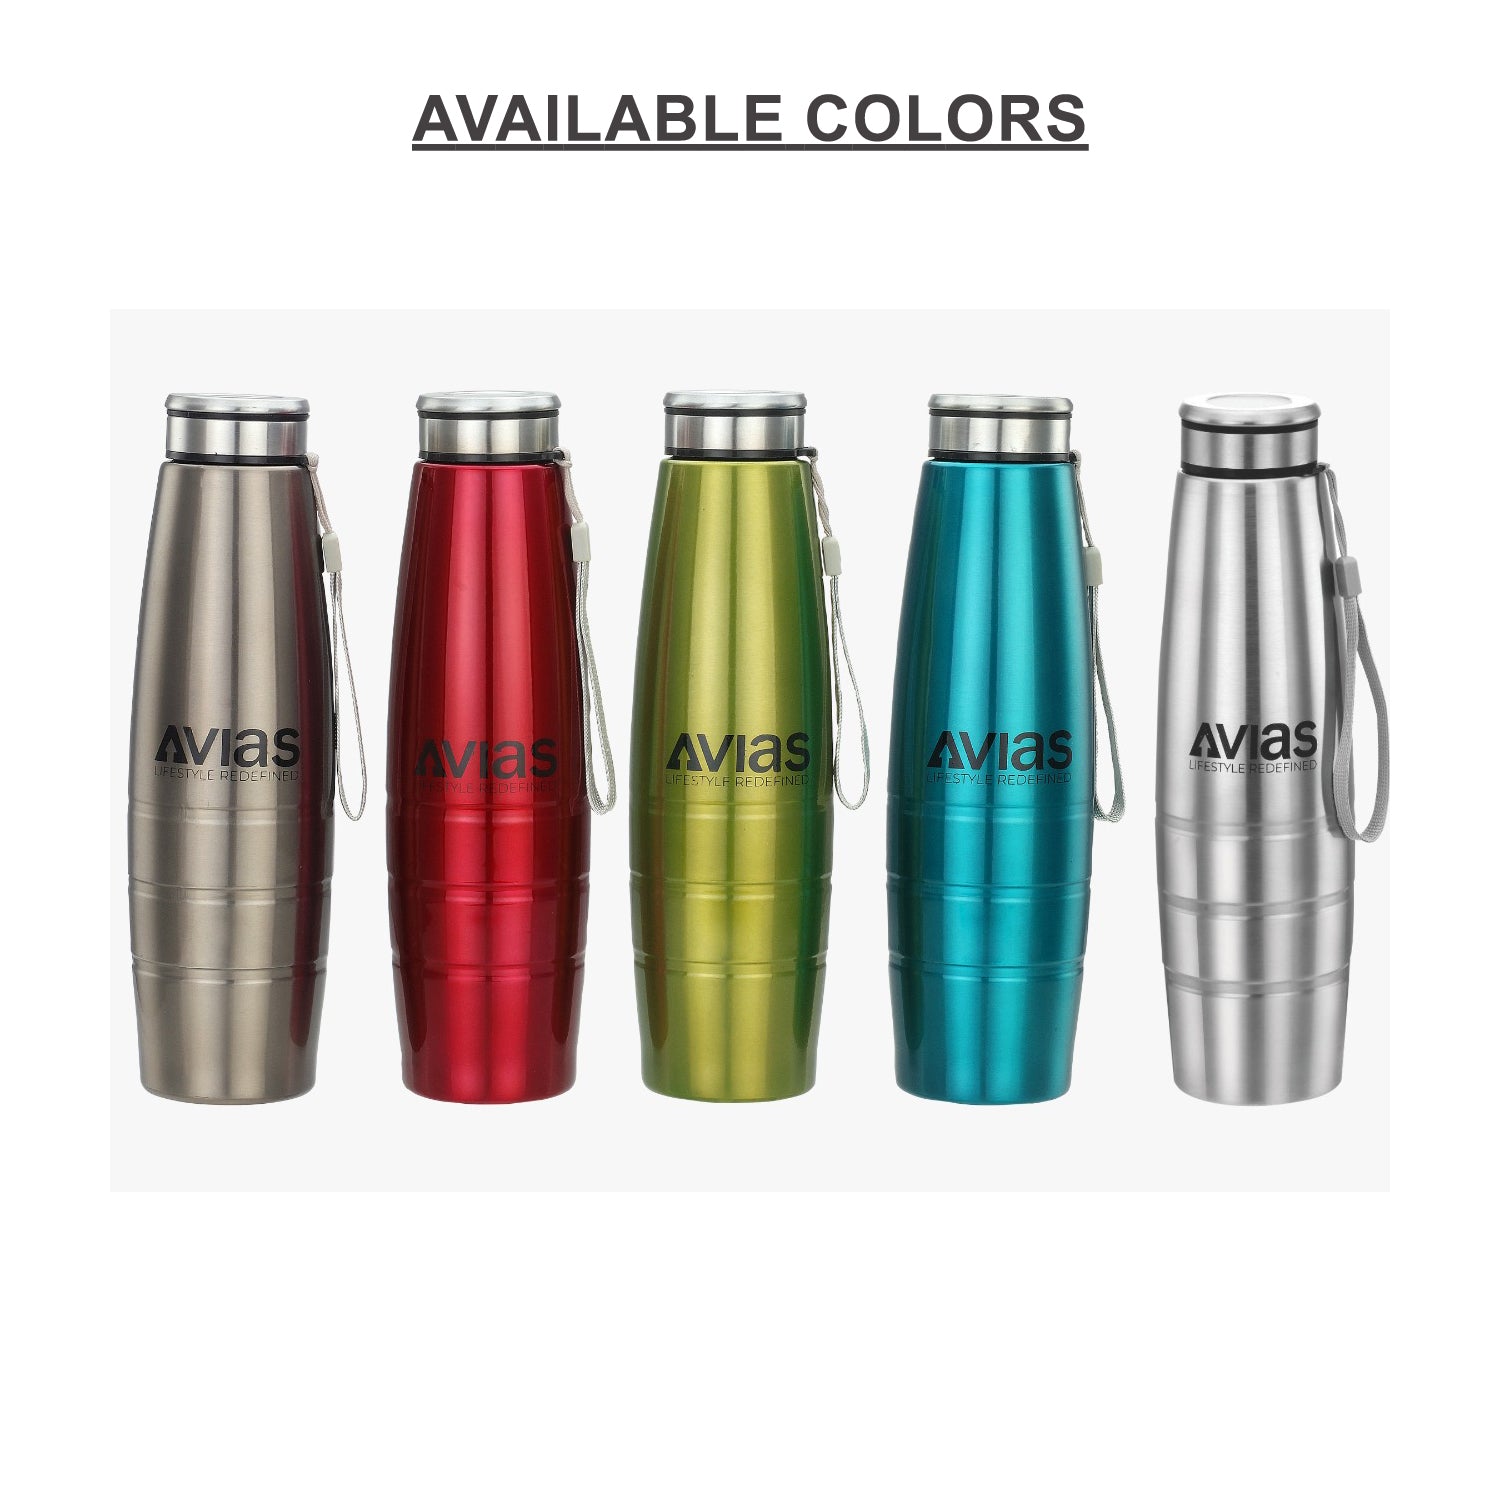 AVIAS Premia Bottle Stainless Steel all colors